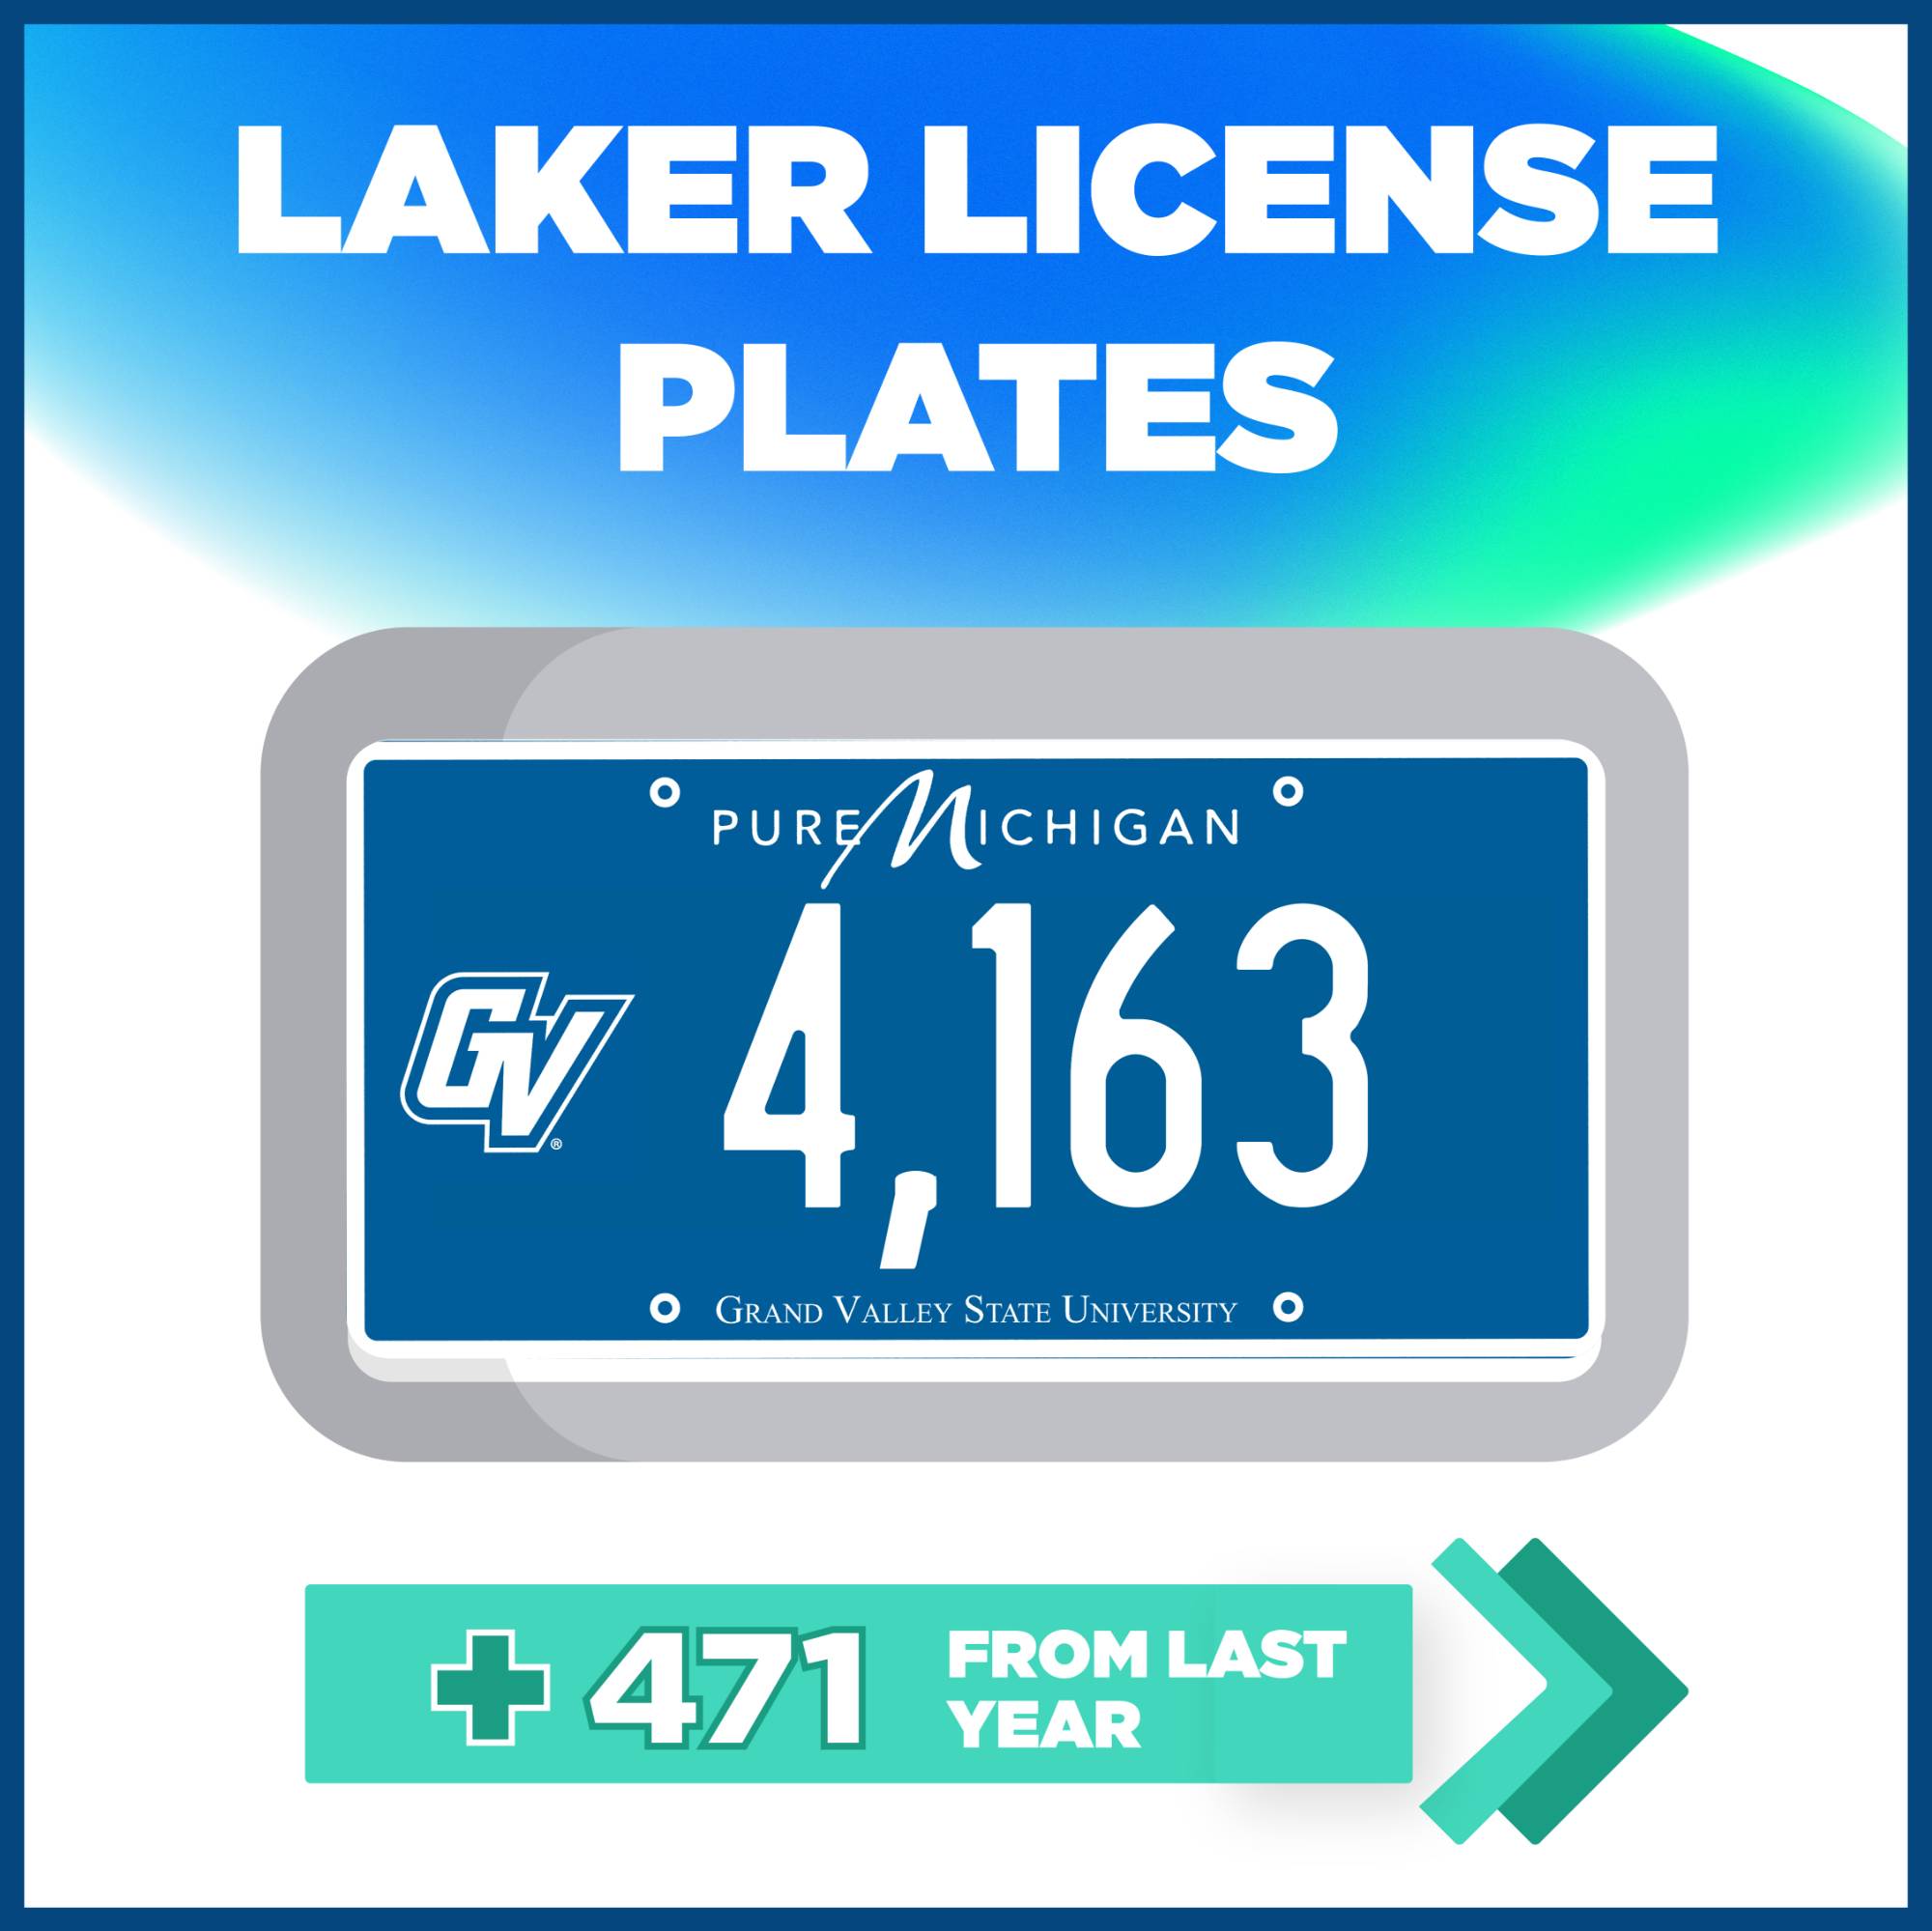 There are a total of 4,163 Laker License Plates. This number increased by 471 plates in the past year.